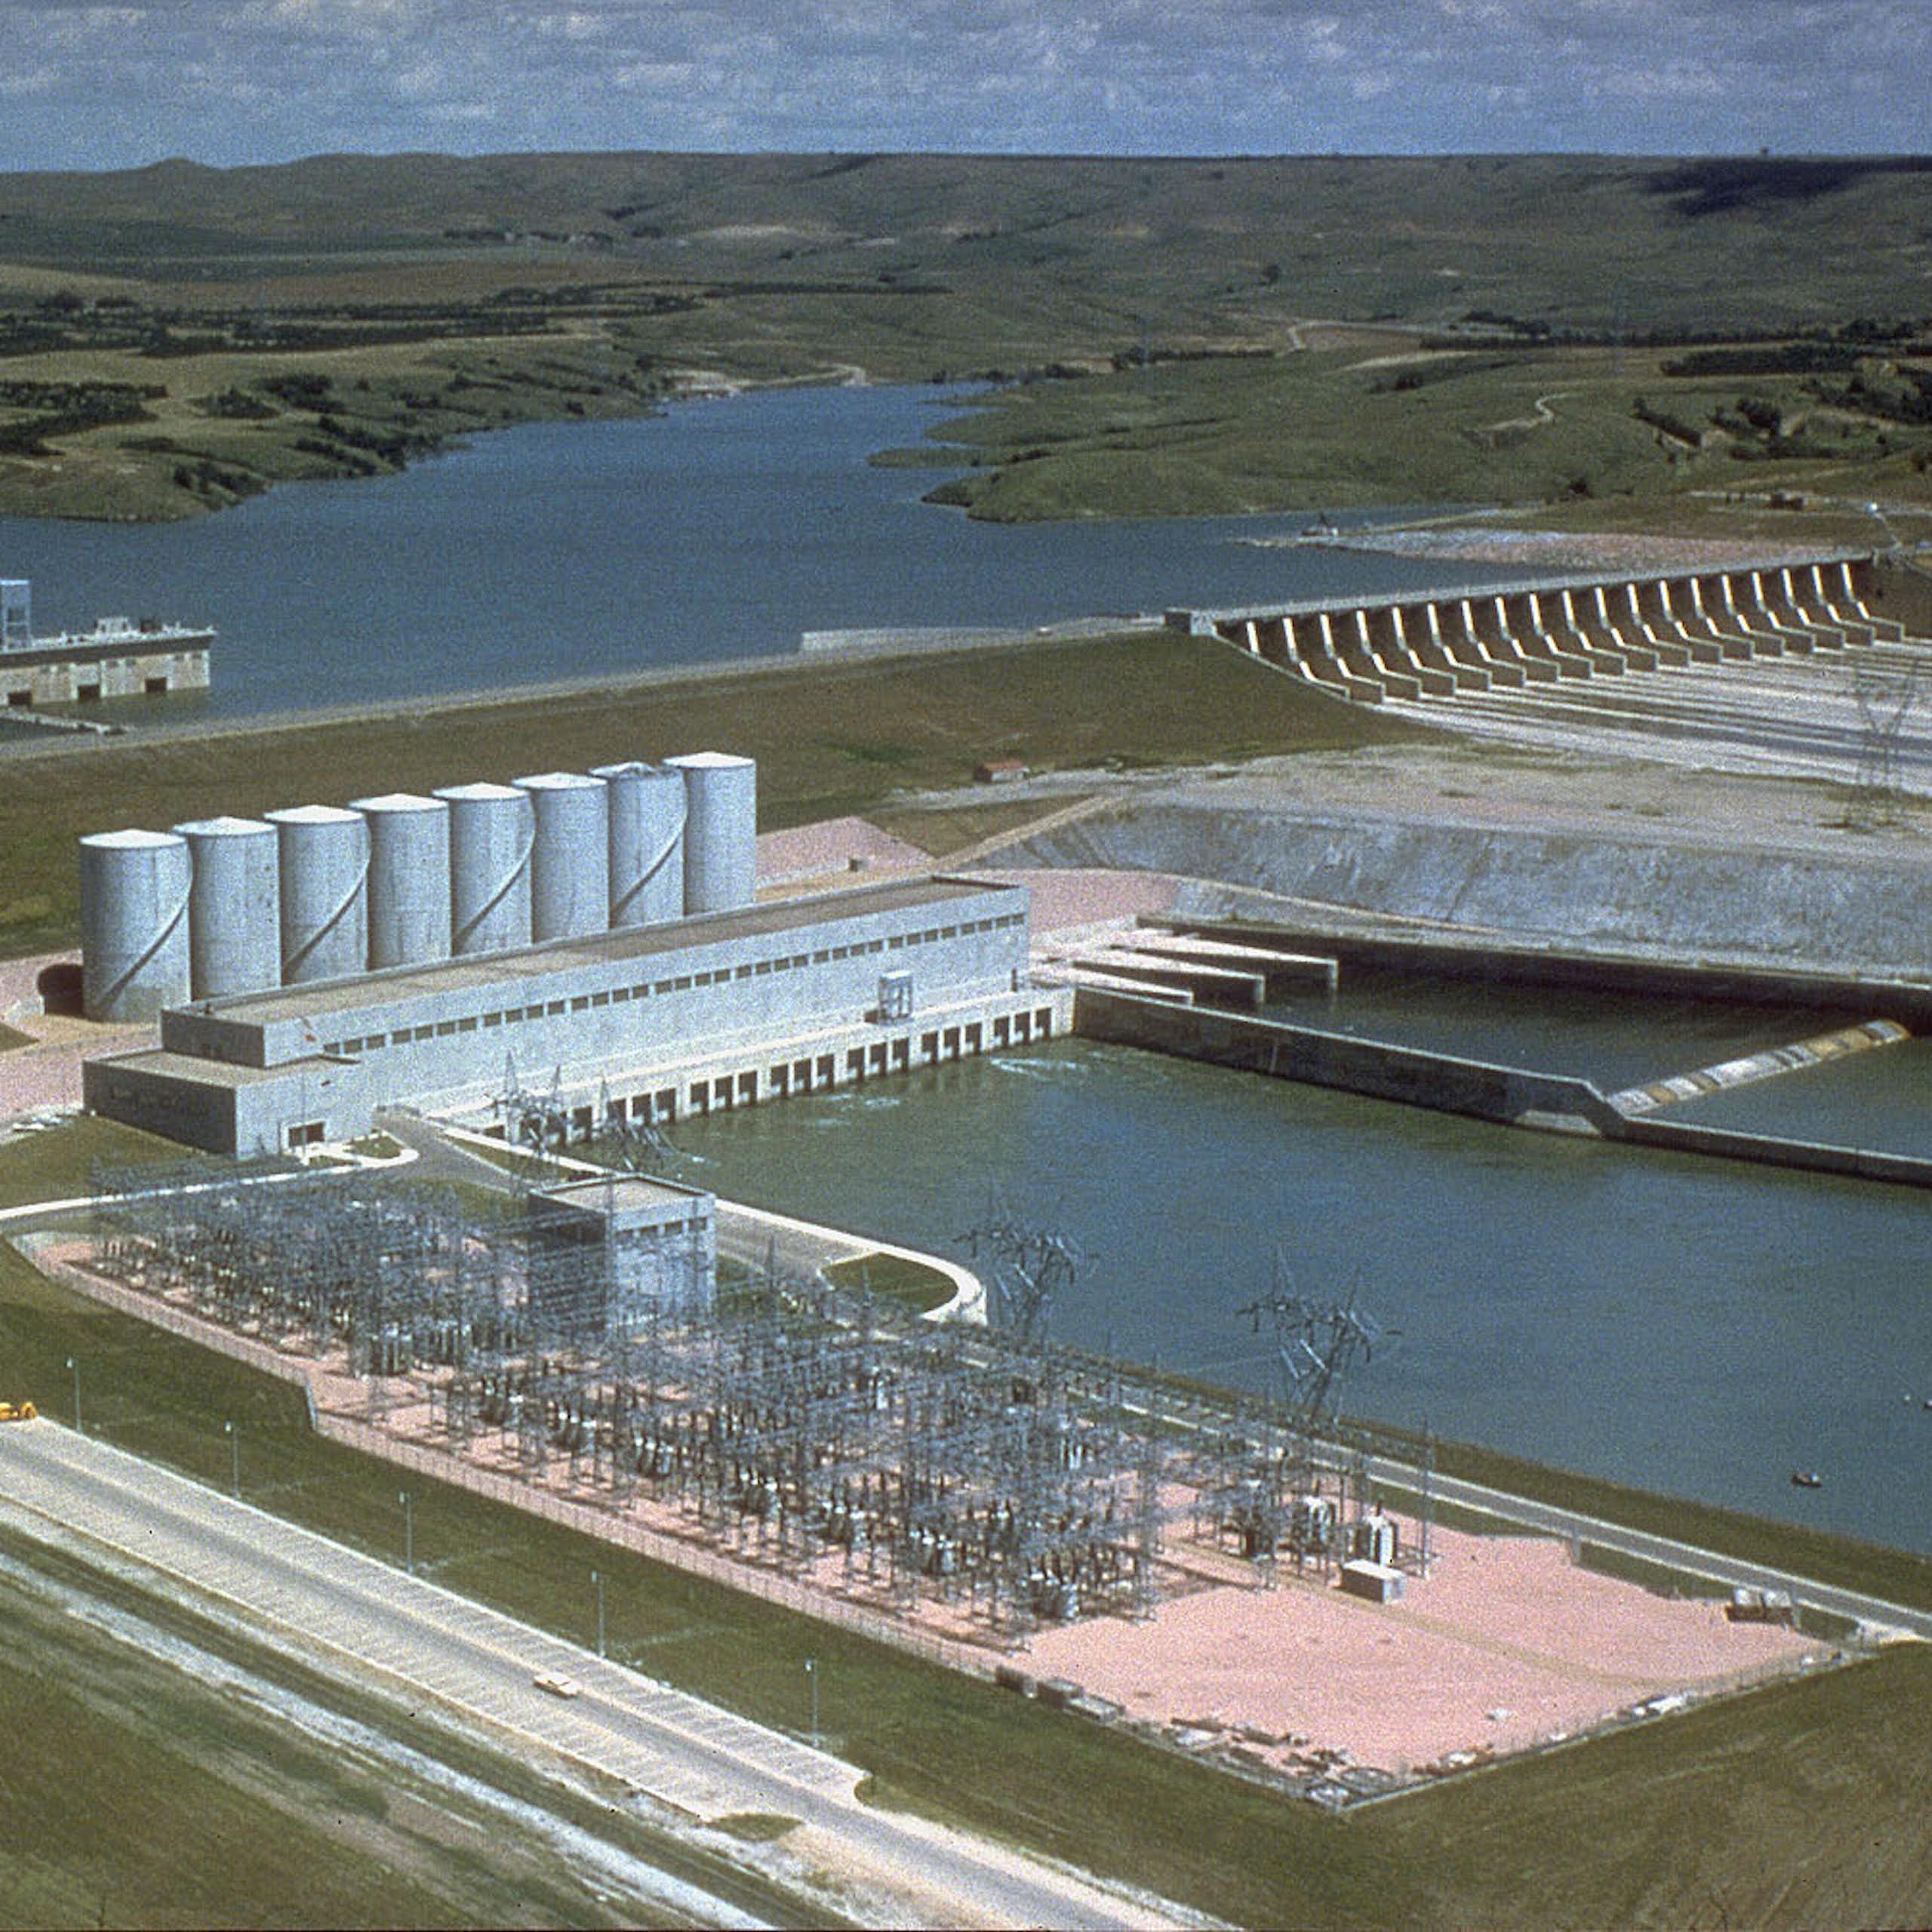 A large dam with a spillway stretches in front of a reservoir